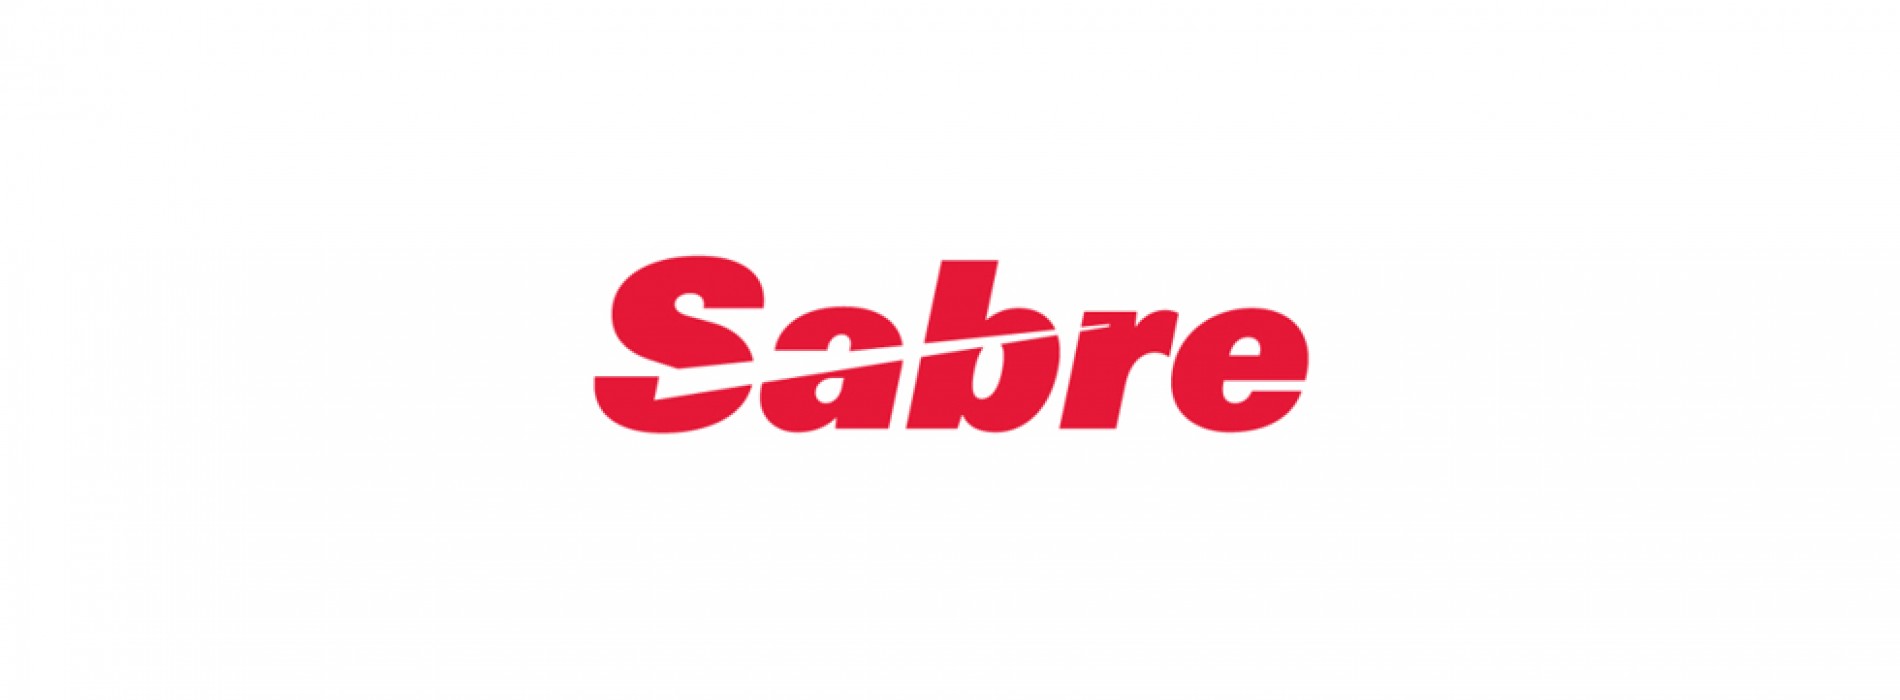 Sabre creates an AI-powered chatbot using Microsoft’s intelligent and natural language services